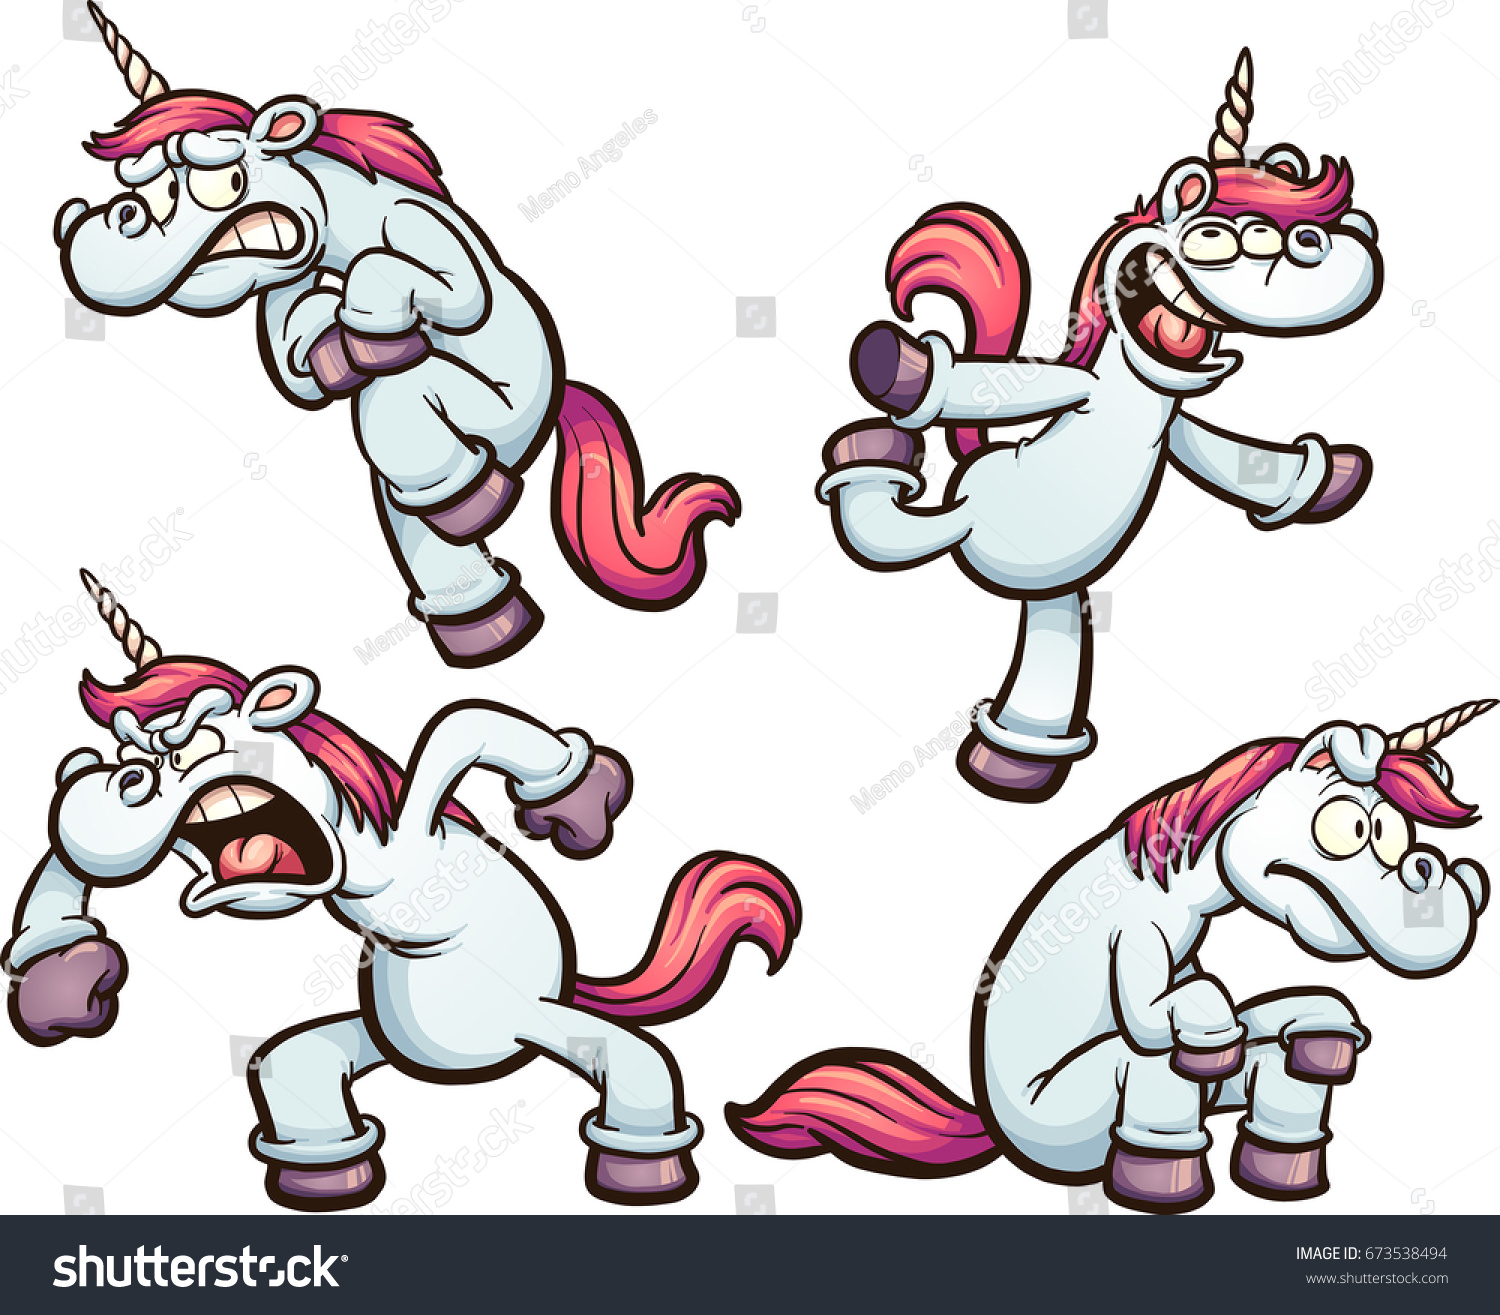 SVG of Cartoon unicorn with different expressions. Vector clip art illustration with simple gradients. Each on a separate layer. svg